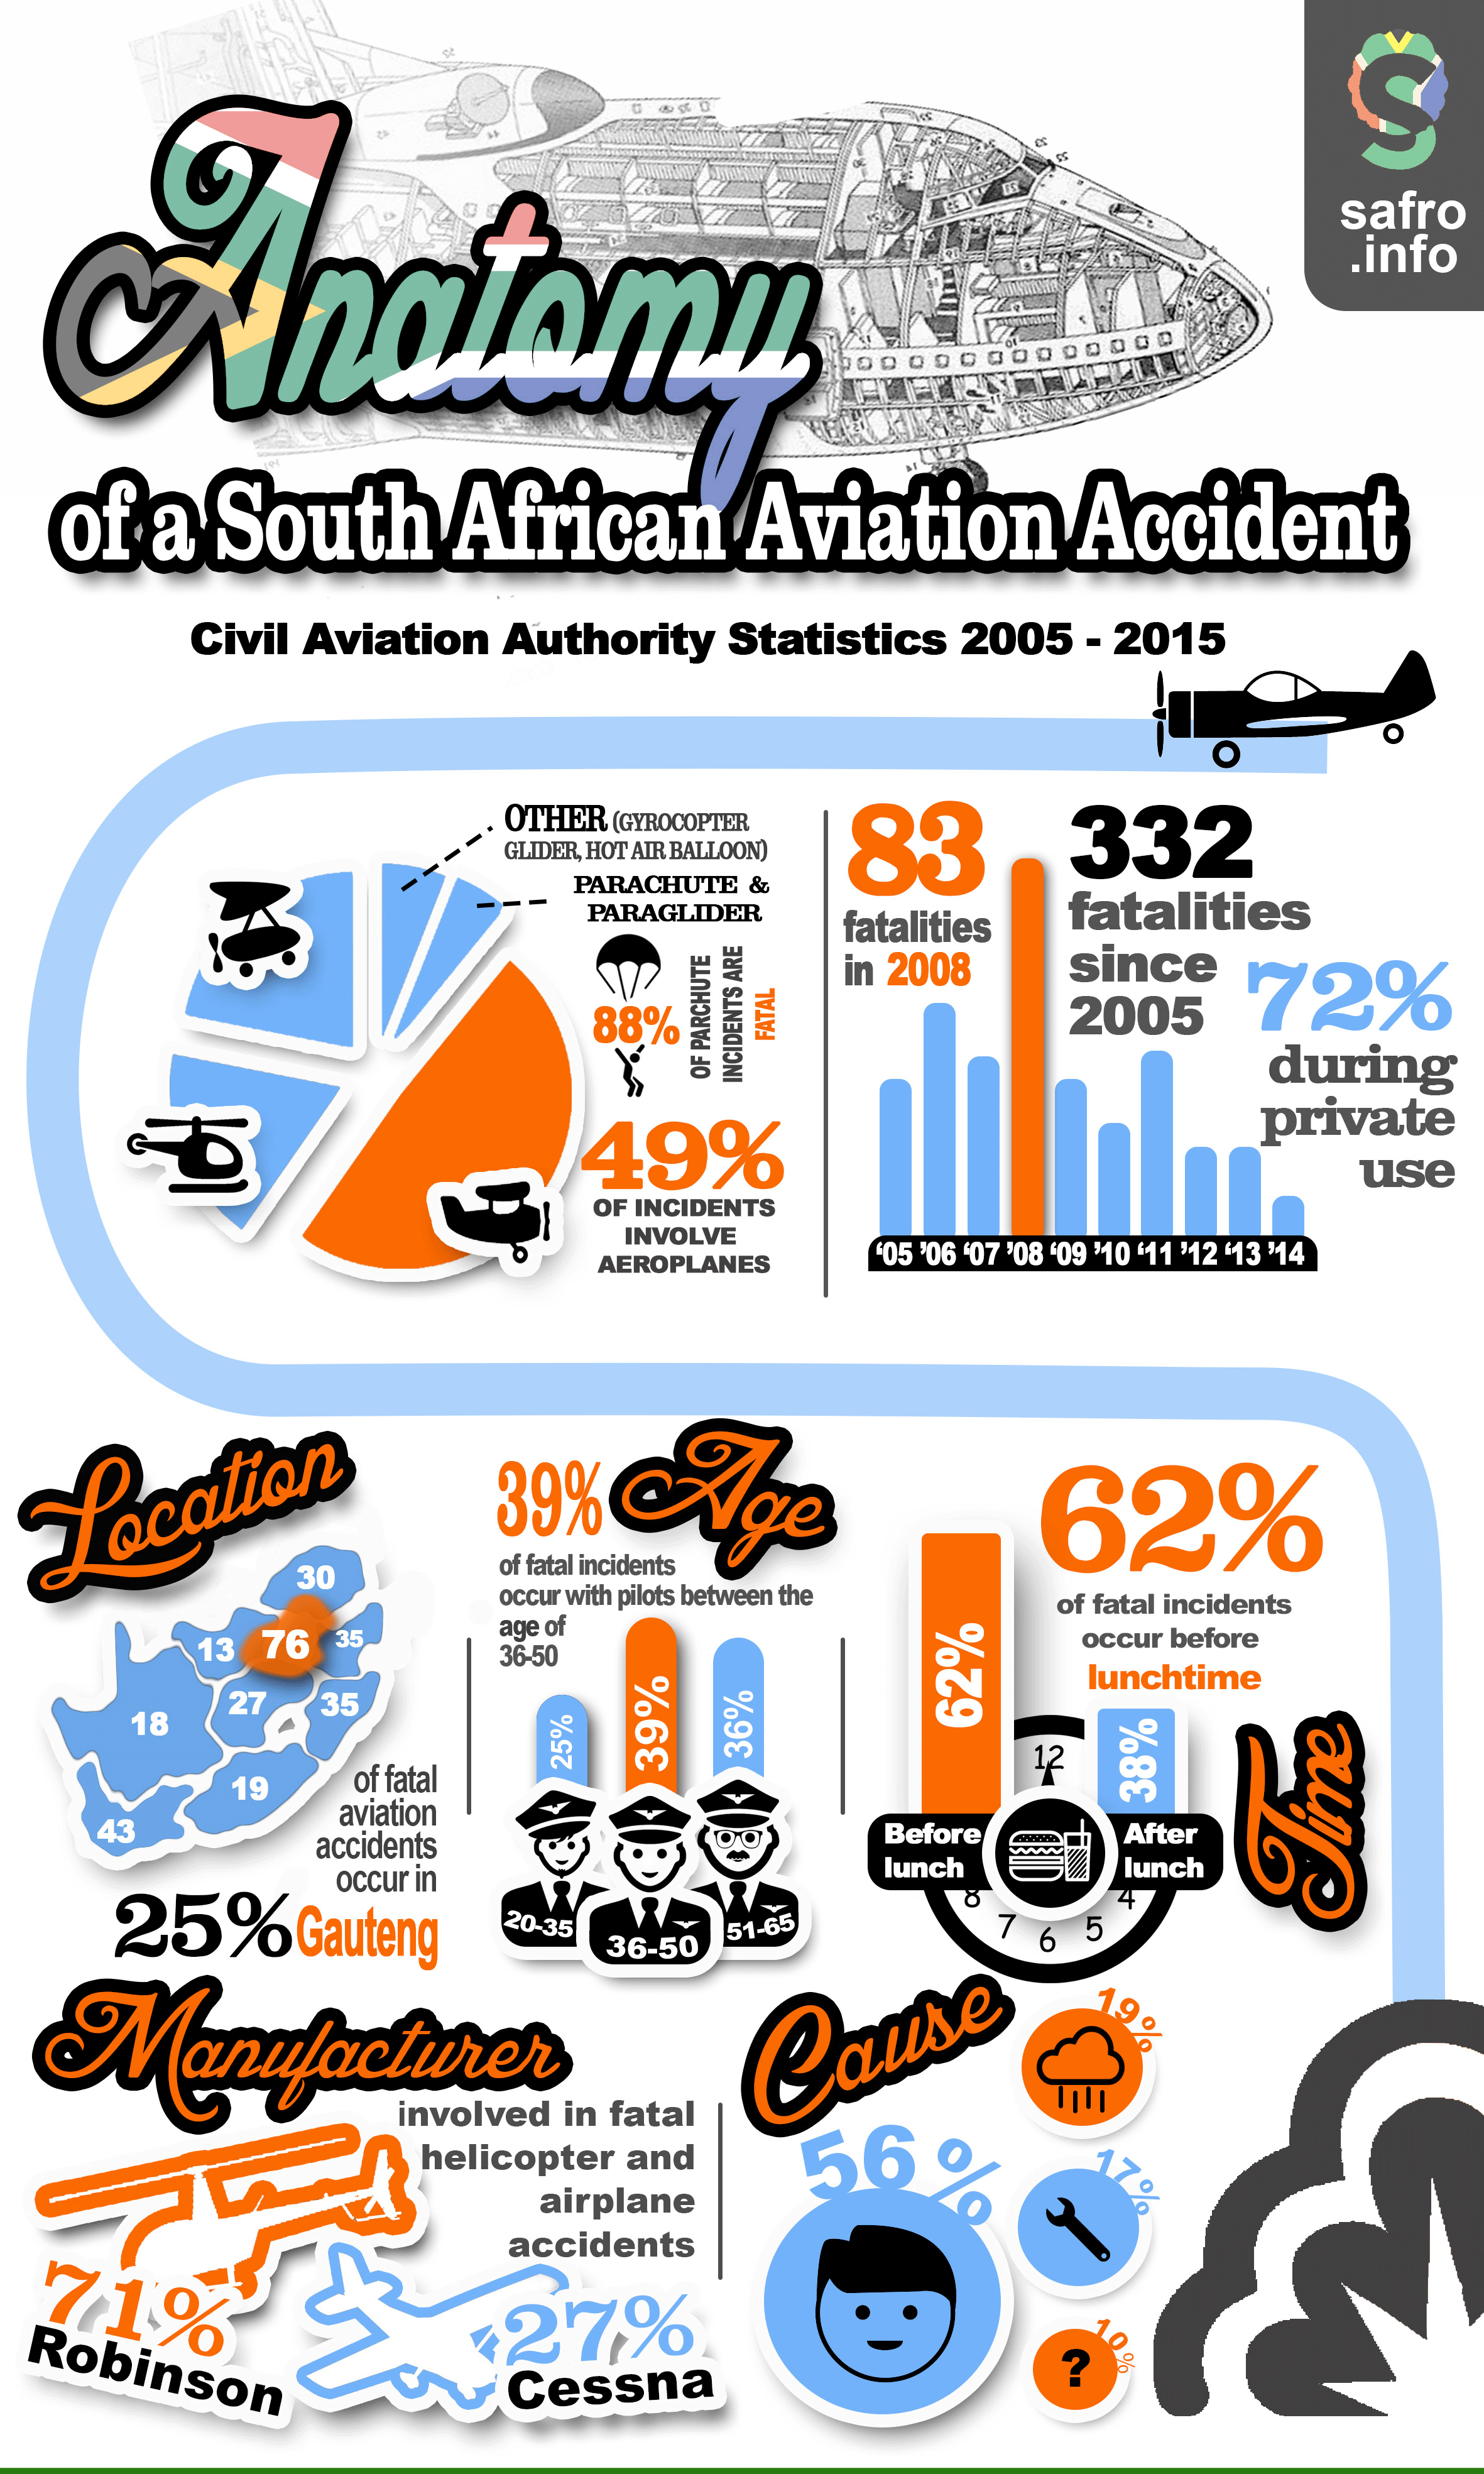 Infographic of statistics regarding aviation accidents in South Africa from 2005 -2015